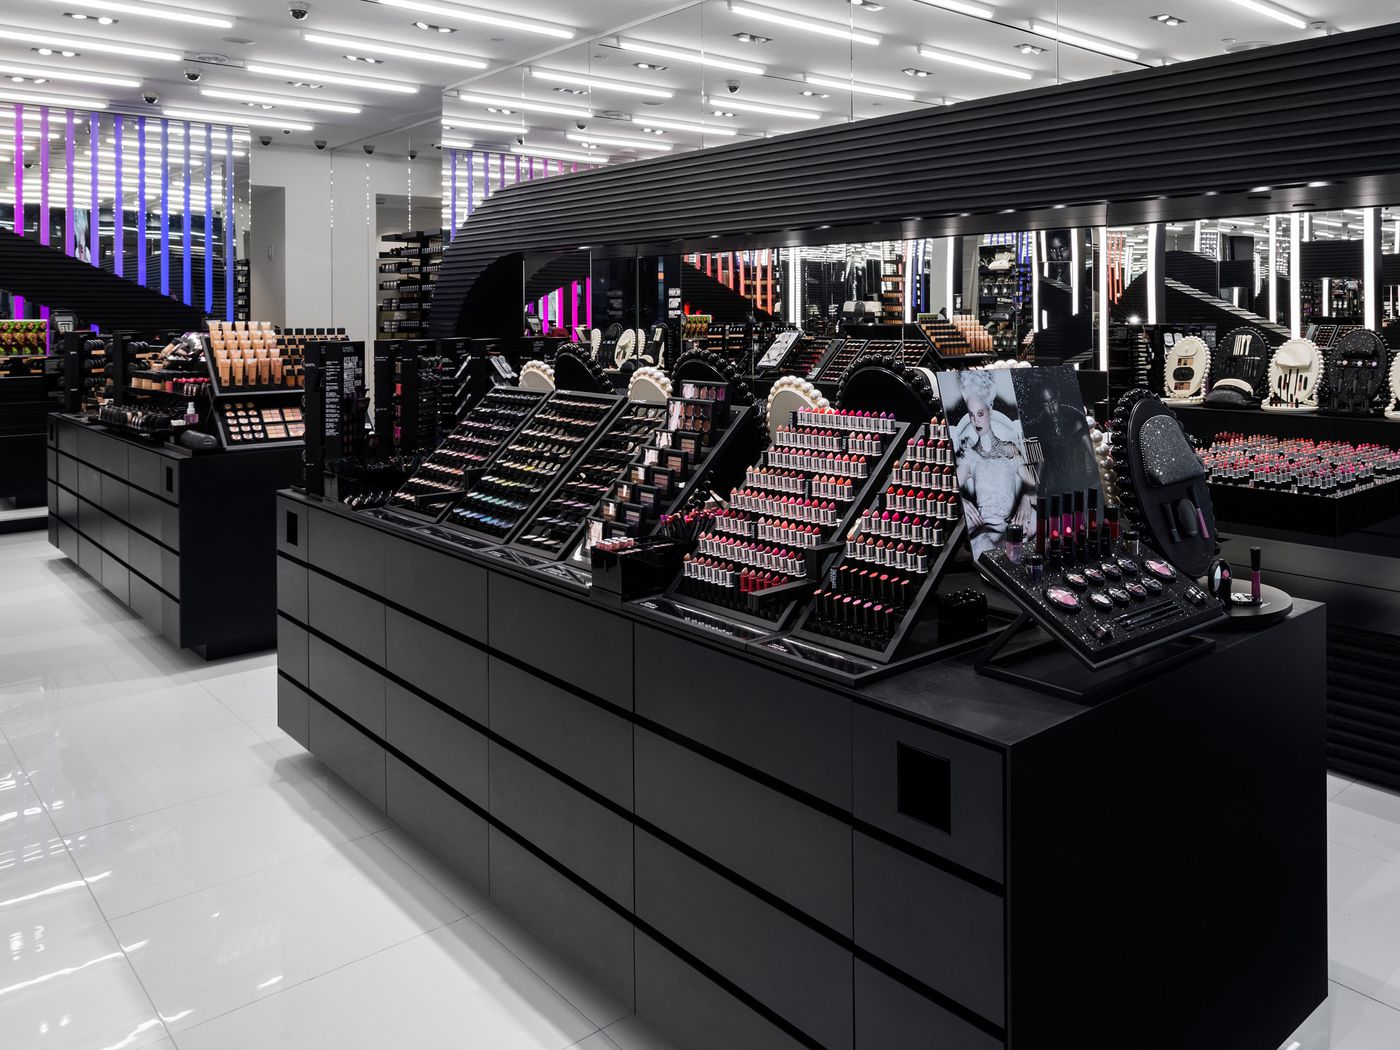 bælte Livlig varemærke Why Do So Many Beauty Stores Look and Feel the Same? - Racked